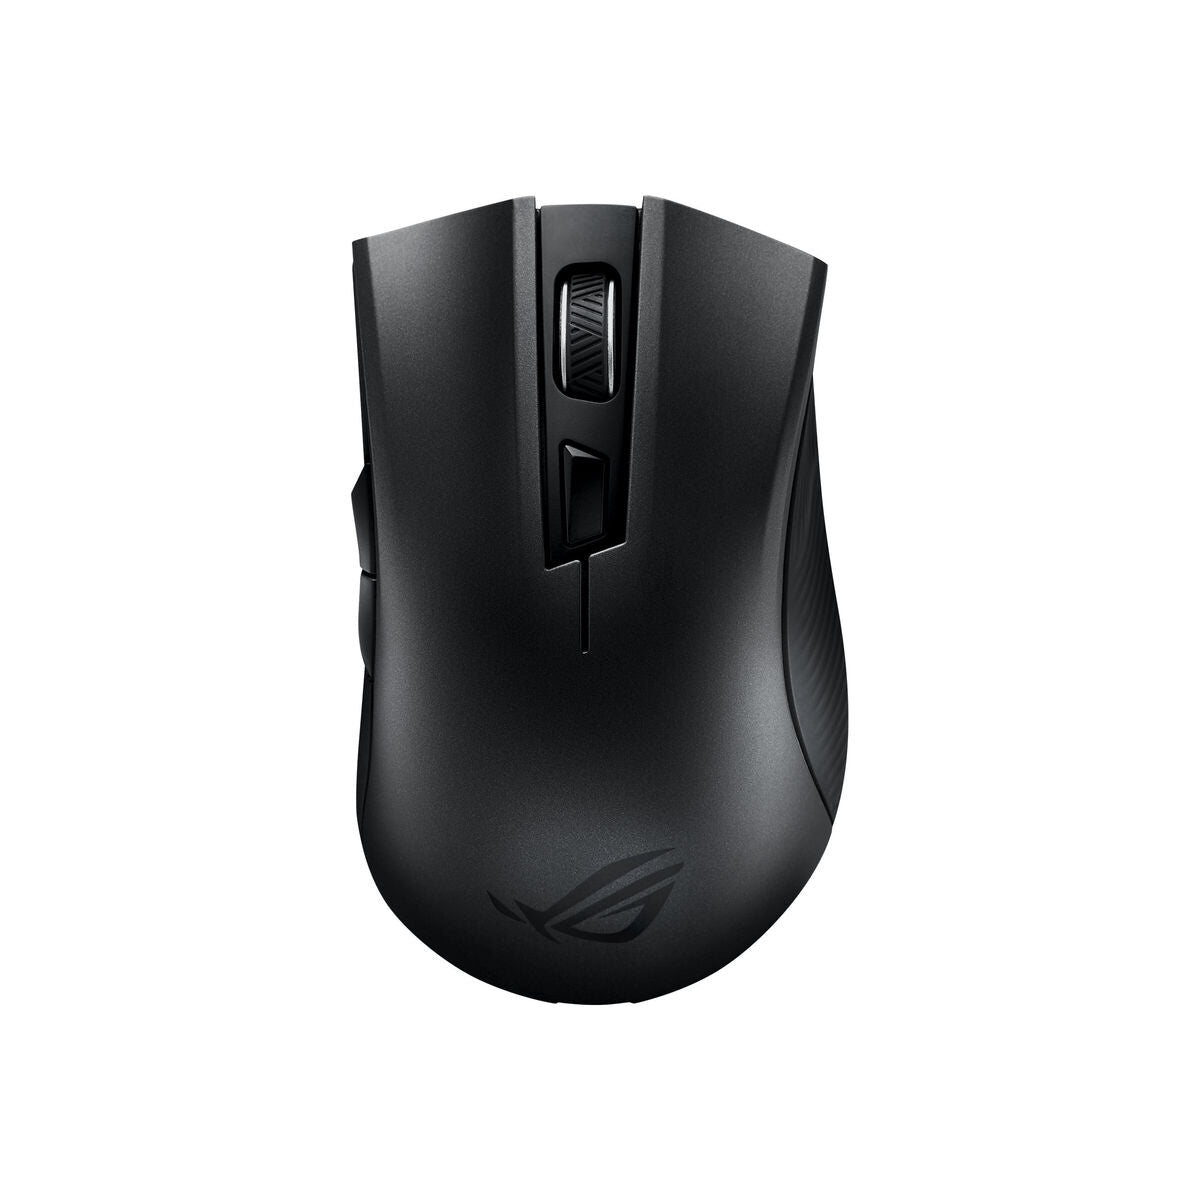 Mouse Asus ROG Strix Carry Black, Asus, Computing, Accessories, mouse-asus-rog-strix-carry-black, Brand_Asus, category-reference-2609, category-reference-2642, category-reference-2656, category-reference-t-19685, category-reference-t-19908, category-reference-t-21353, computers / peripherals, Condition_NEW, office, Price_50 - 100, RiotNook